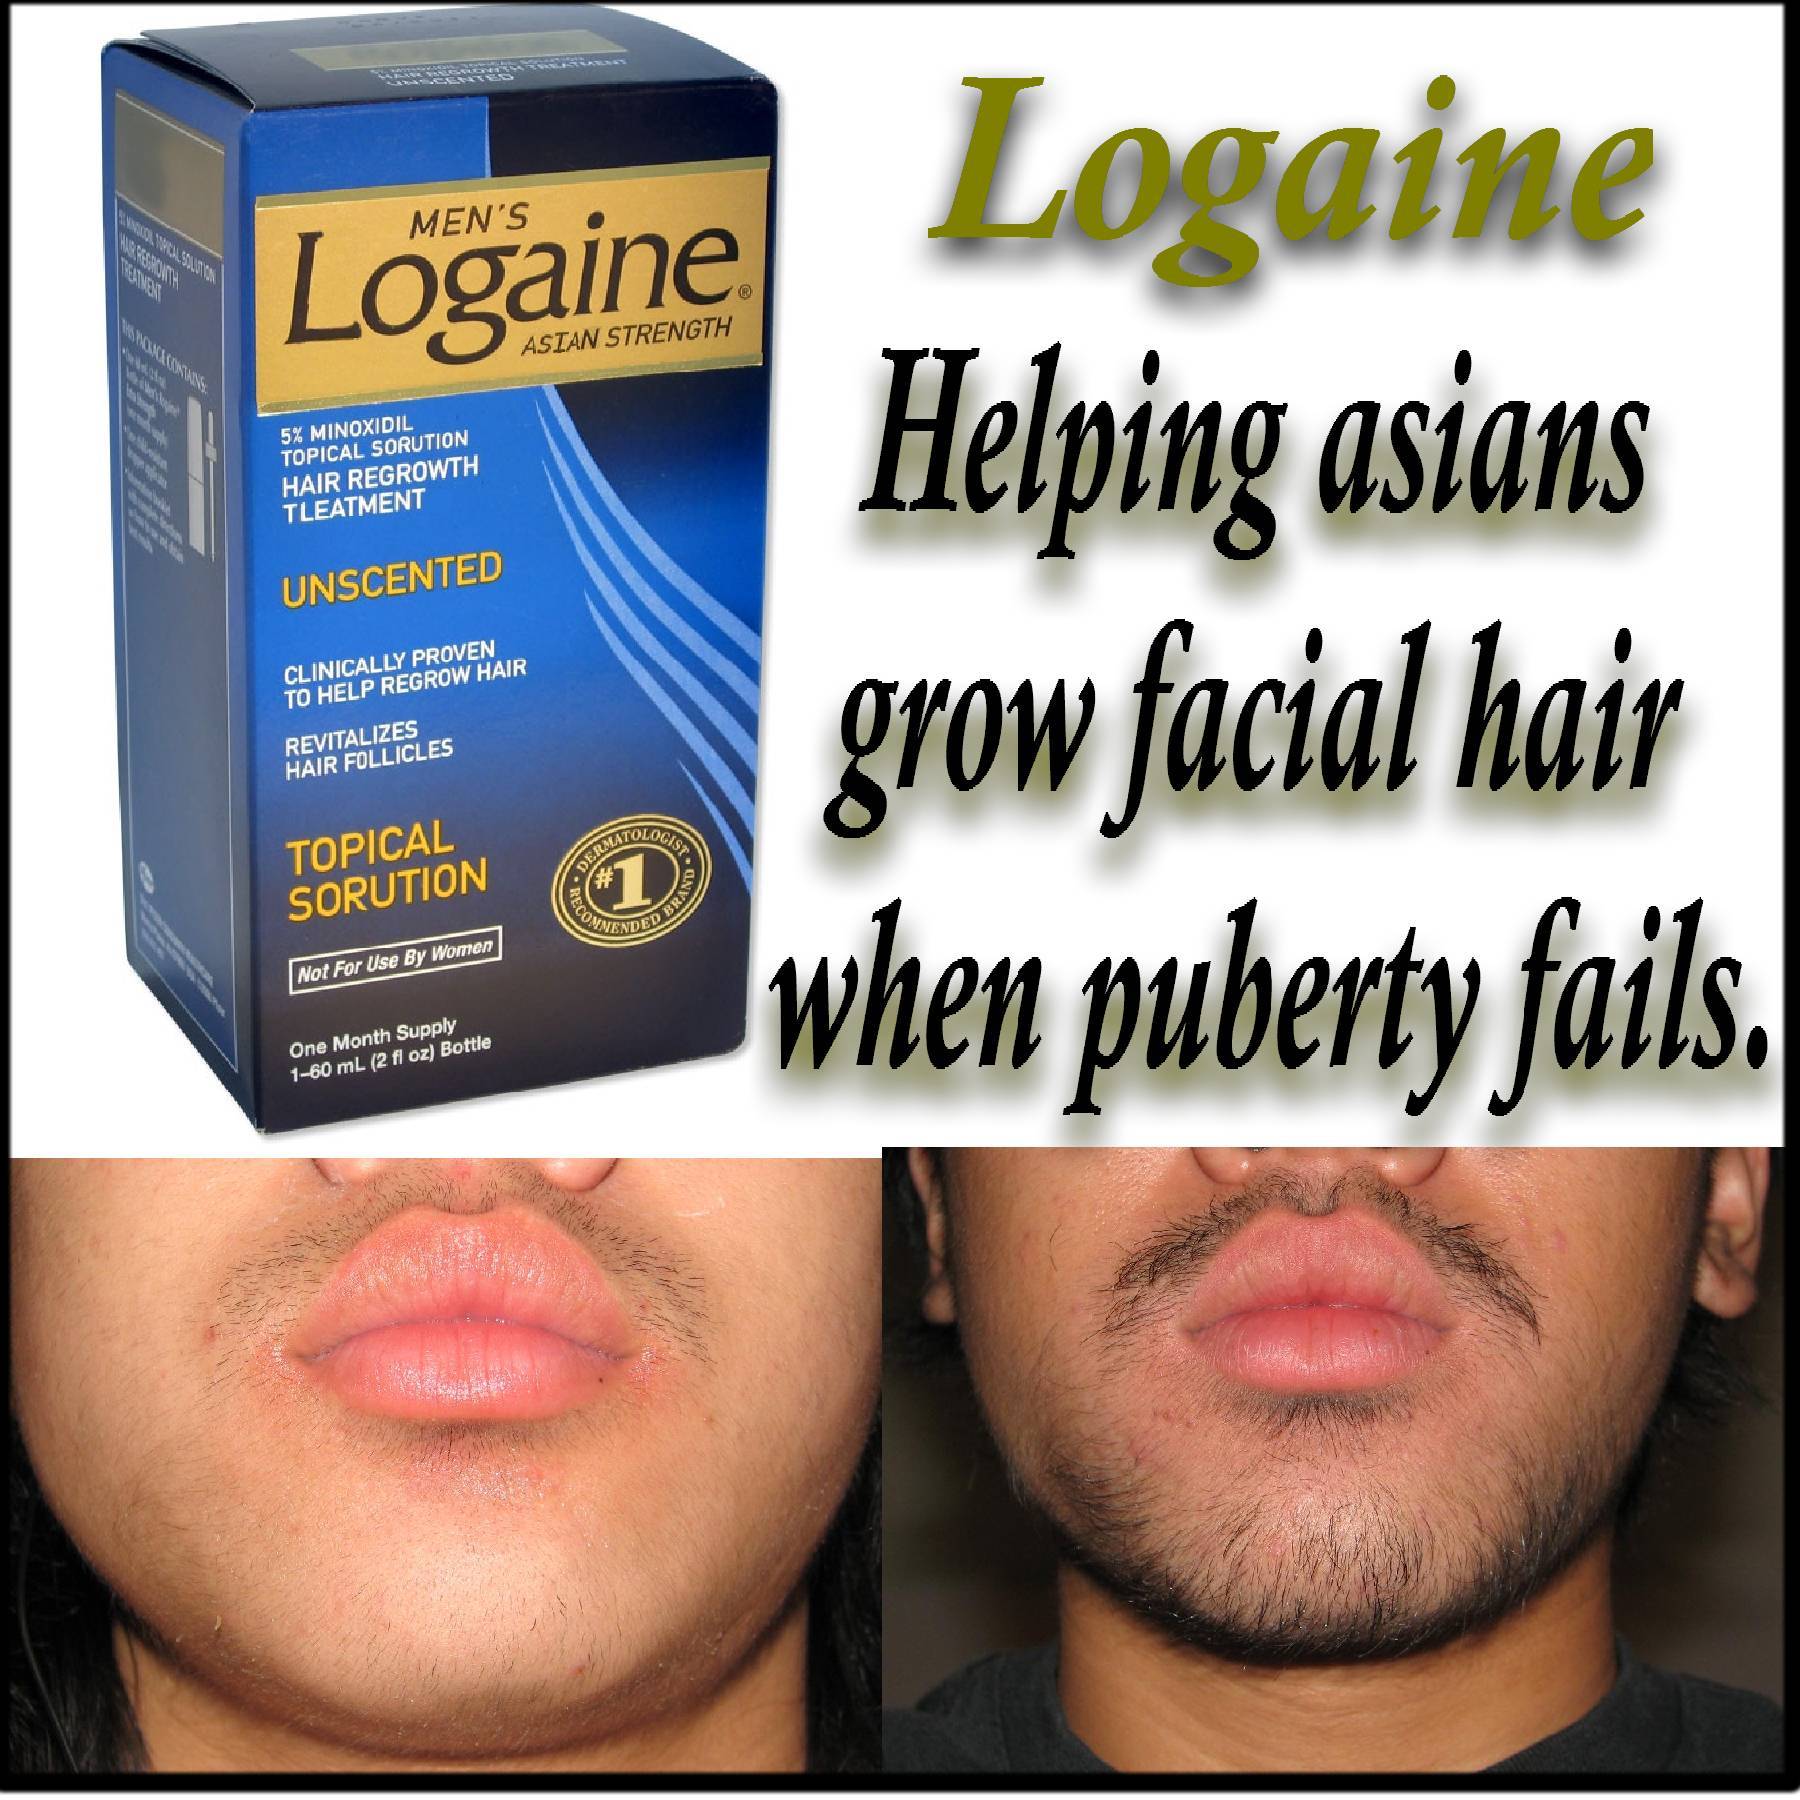 Logaine in Asian Strength, a topical sorution to glowing your facial hair when puberty fails.  Revitarizes hair forricles turning boys into boys with facial hair. 